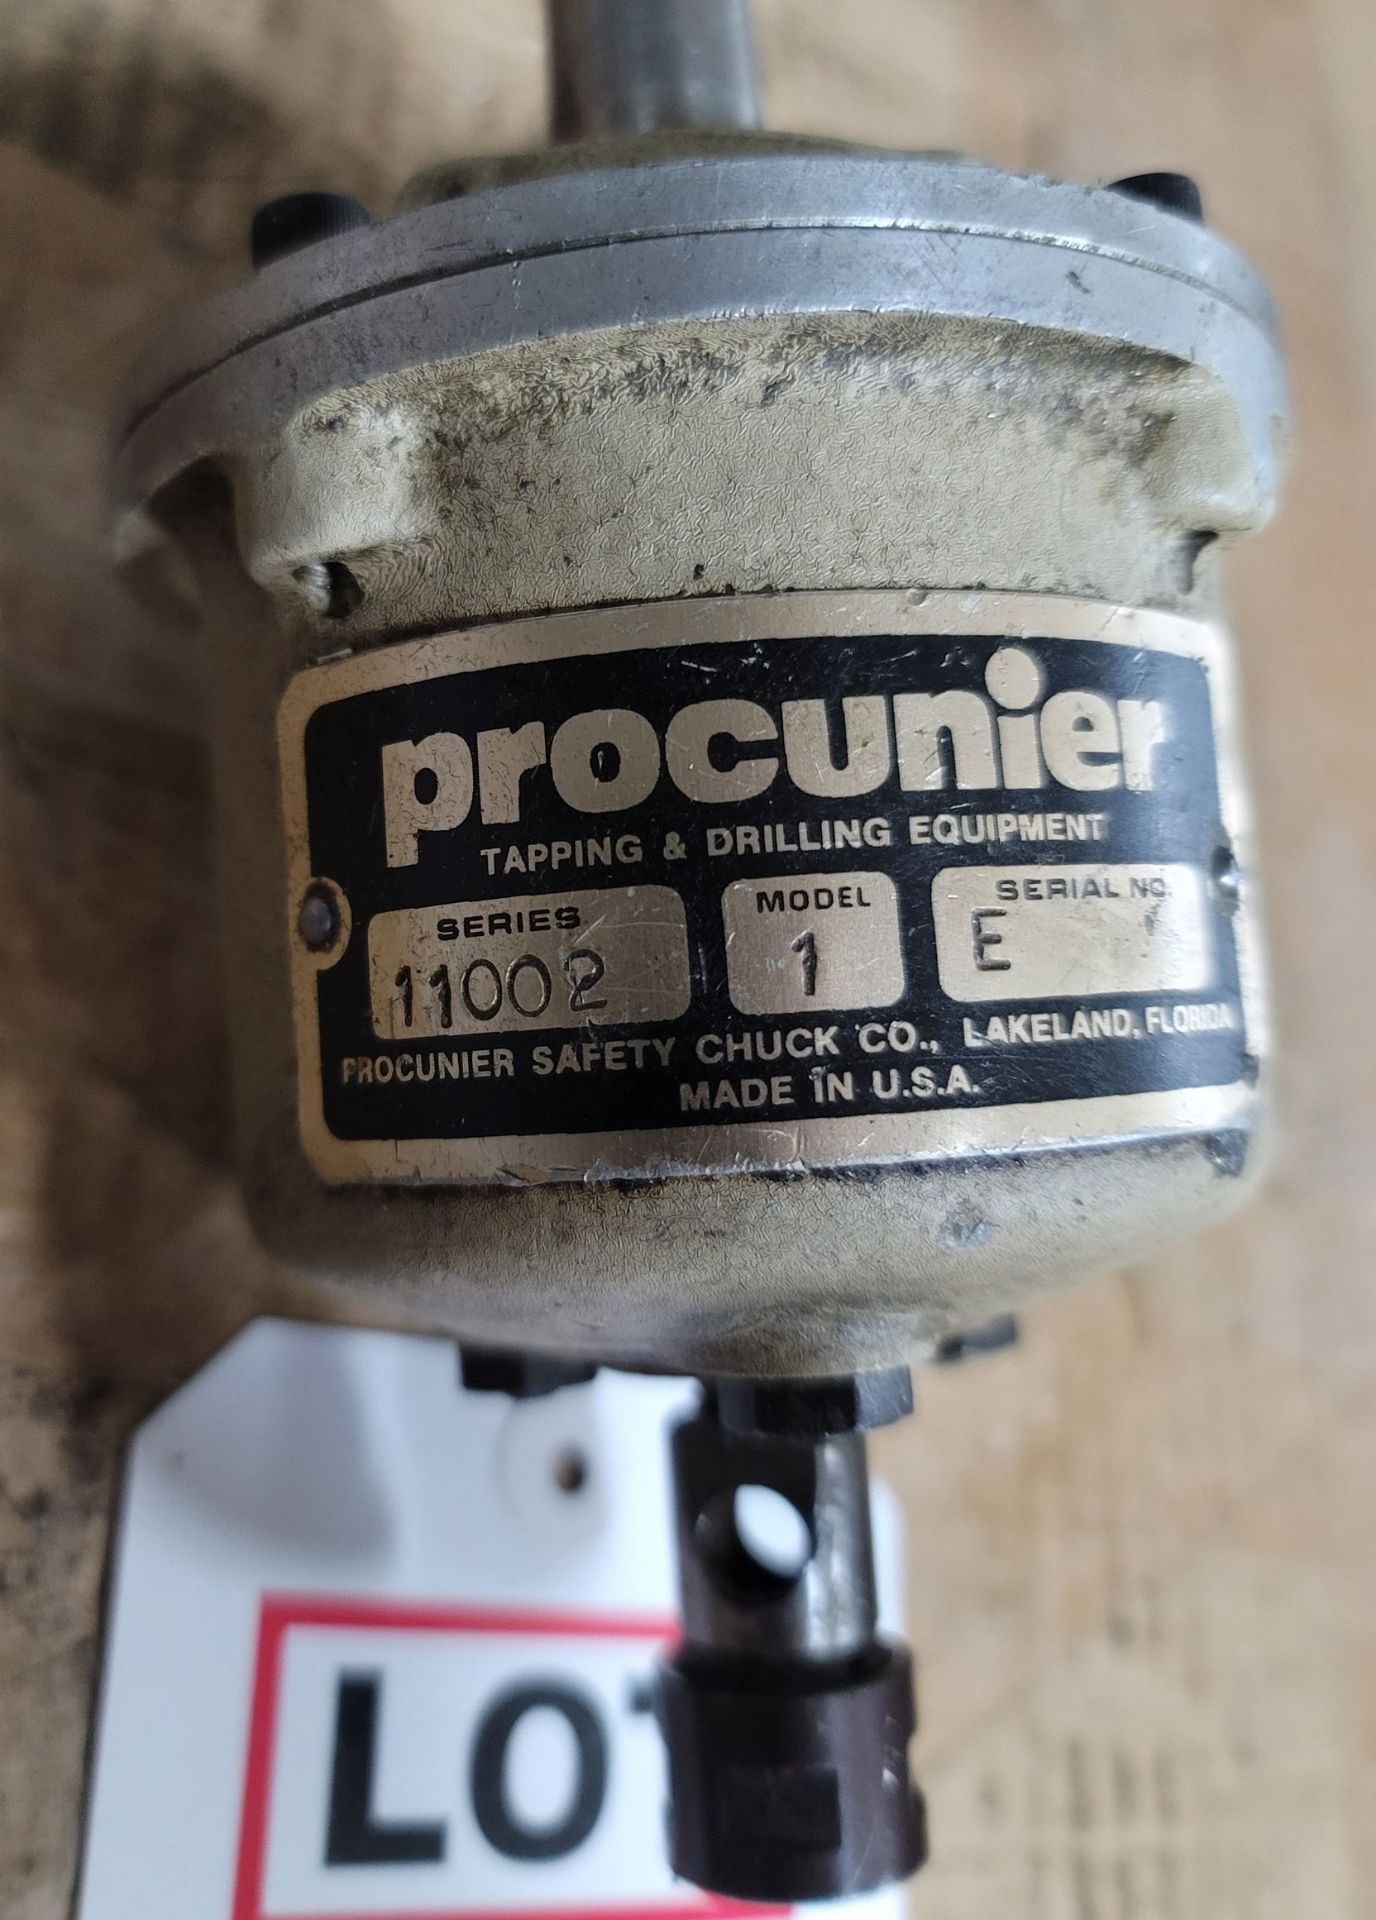 PROCUNIER TAPPING HEAD, SERIES 11002, MODEL 1, S/N E - Image 3 of 3